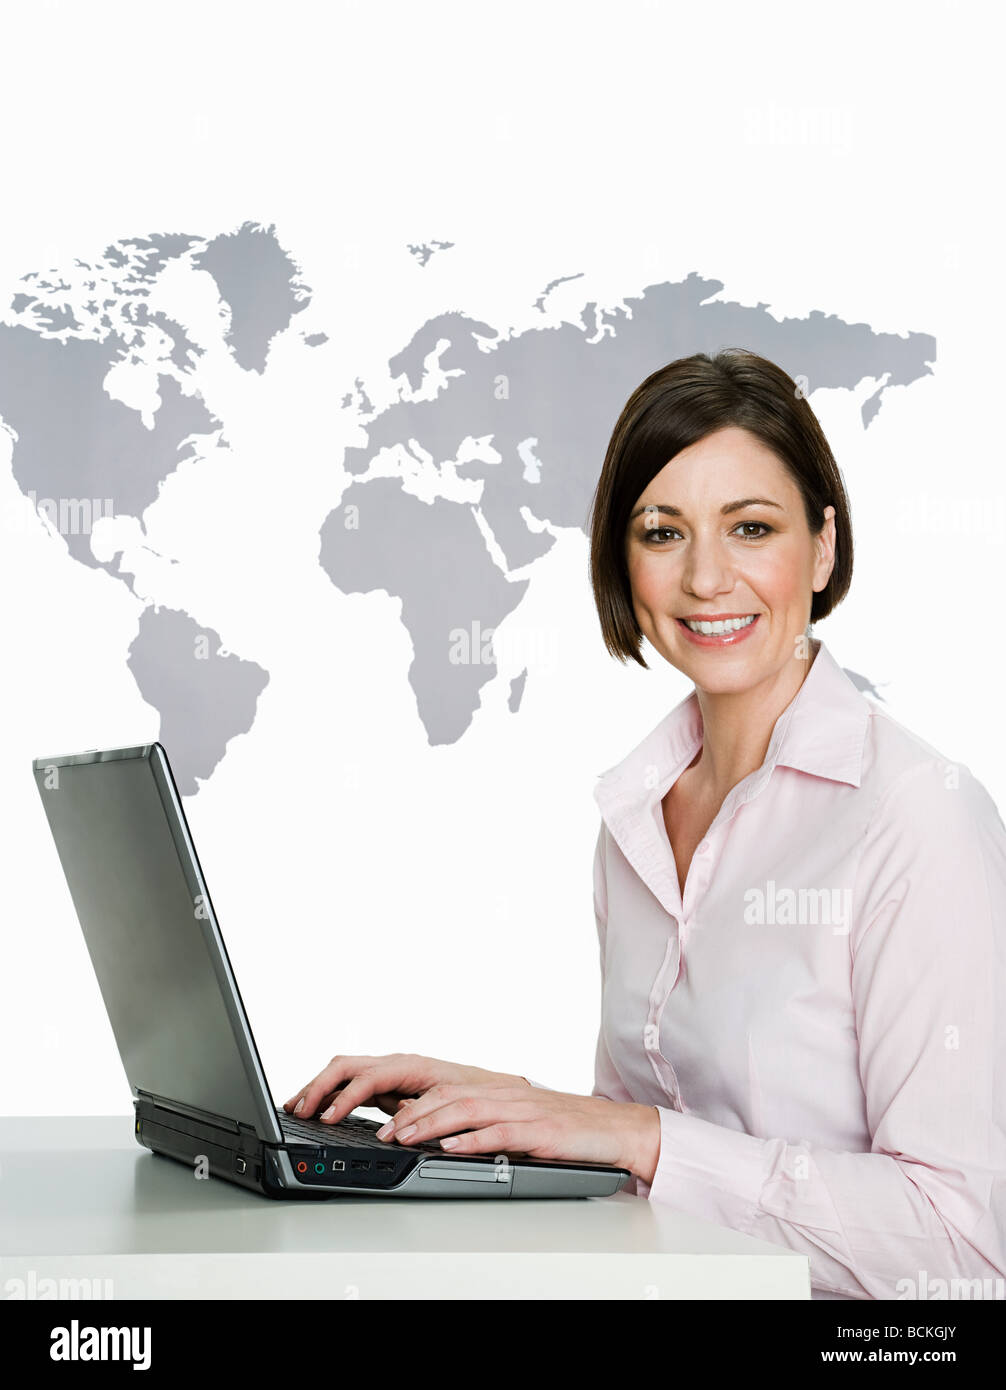 Businesswoman with laptop Stock Photo